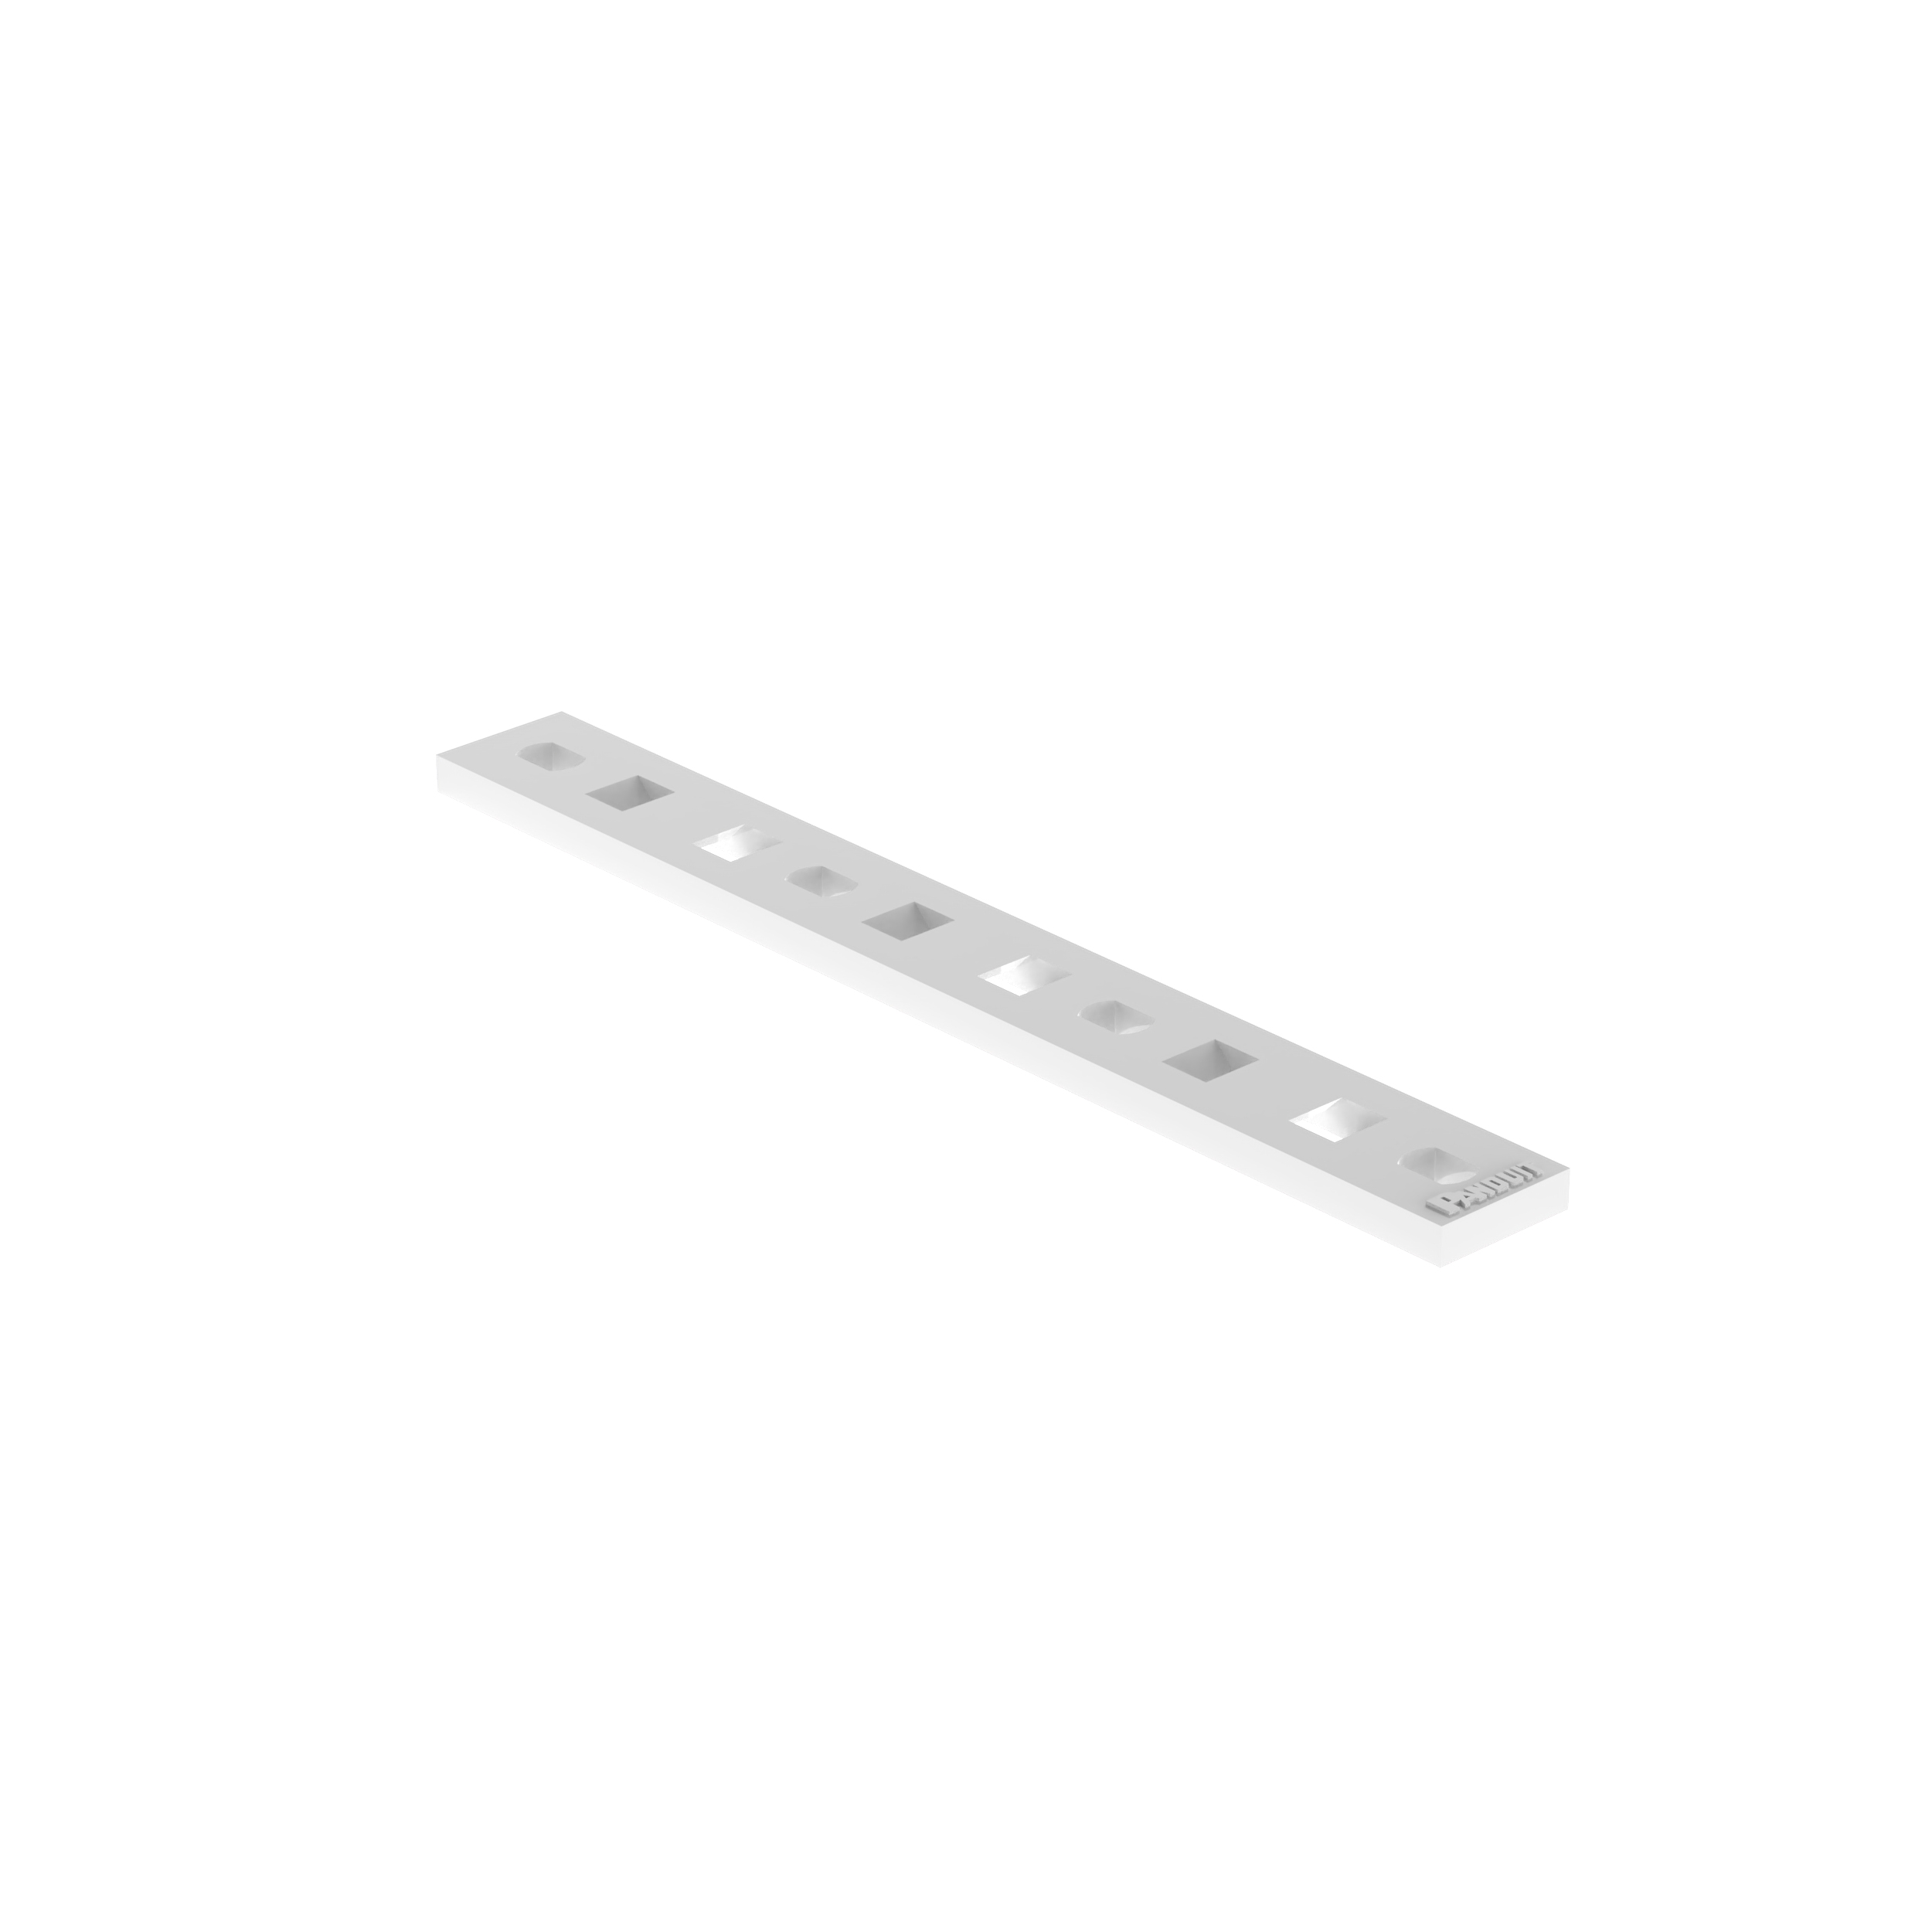 MTP3S-E6-C Tie Plate, Natural, PA 6.6, 4.25x0.5", #6 Screw, PK100